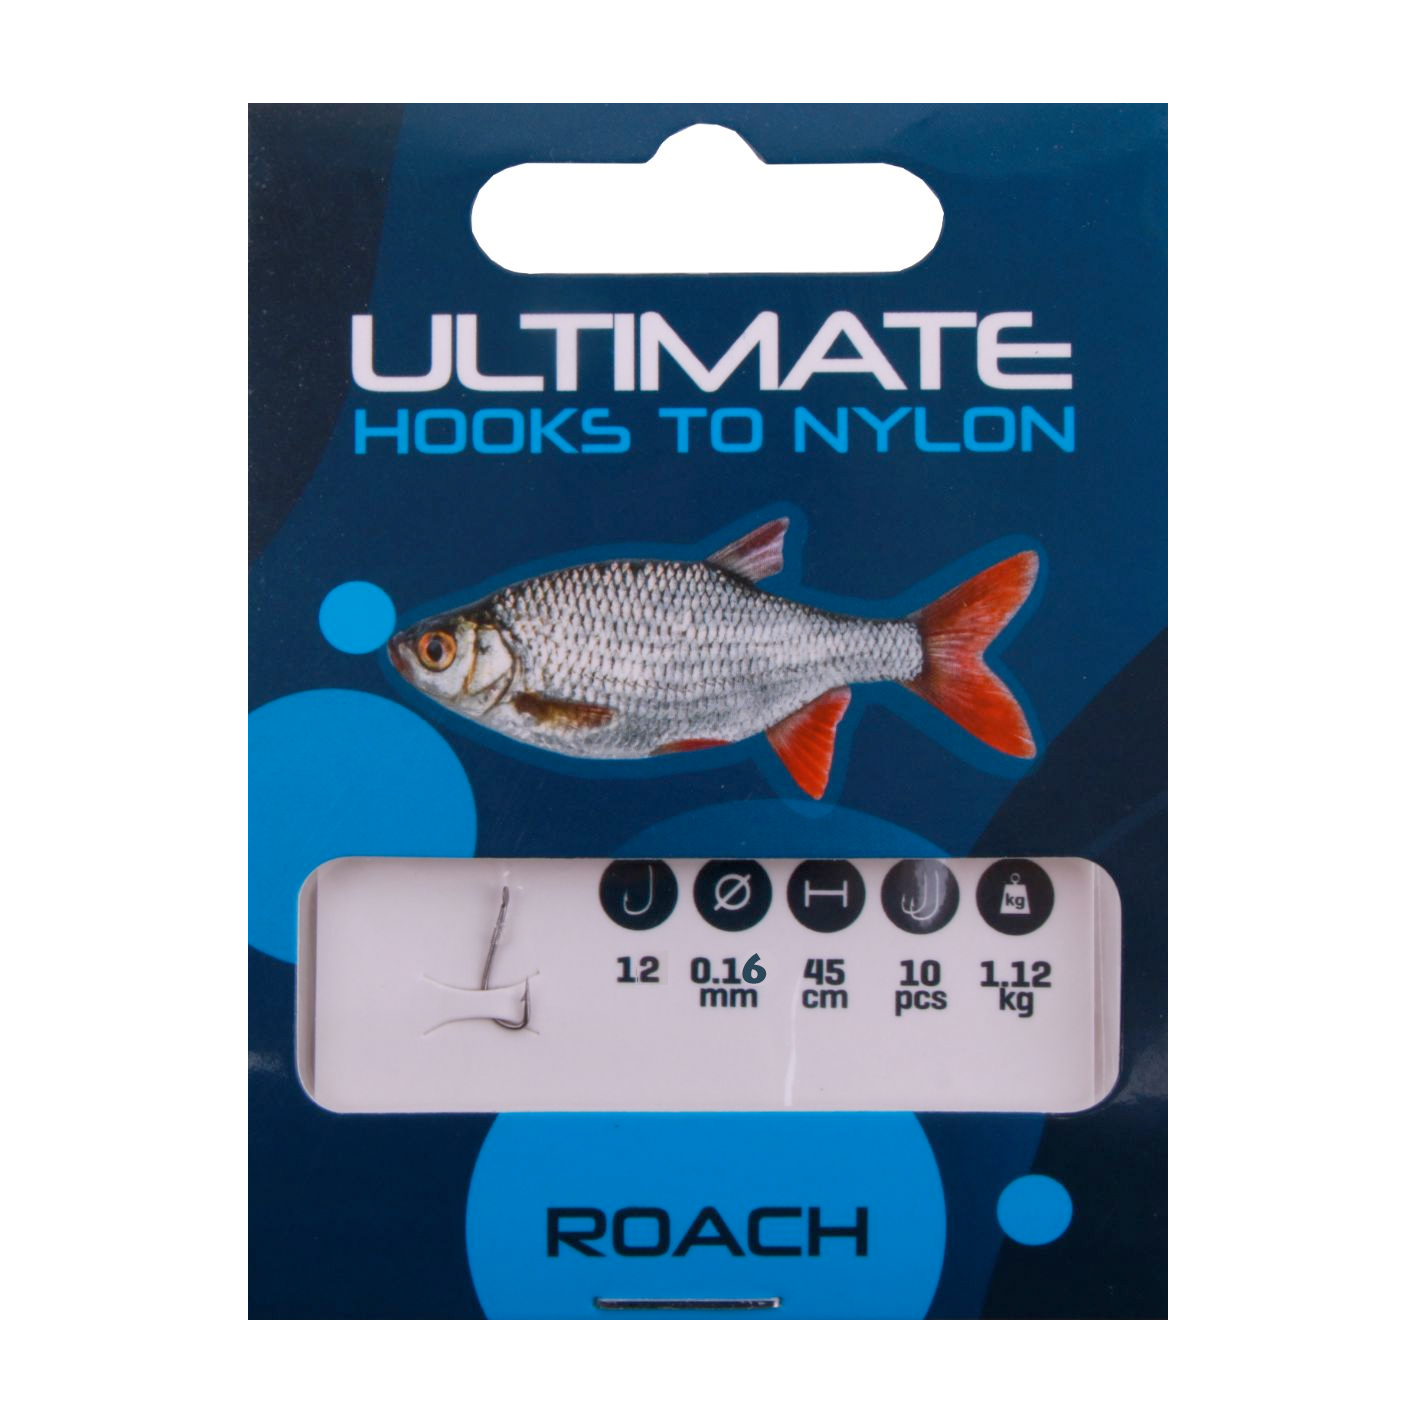 NGT Match & Feeder Set with 2 rods! - Ultimate Hooks to Nylon